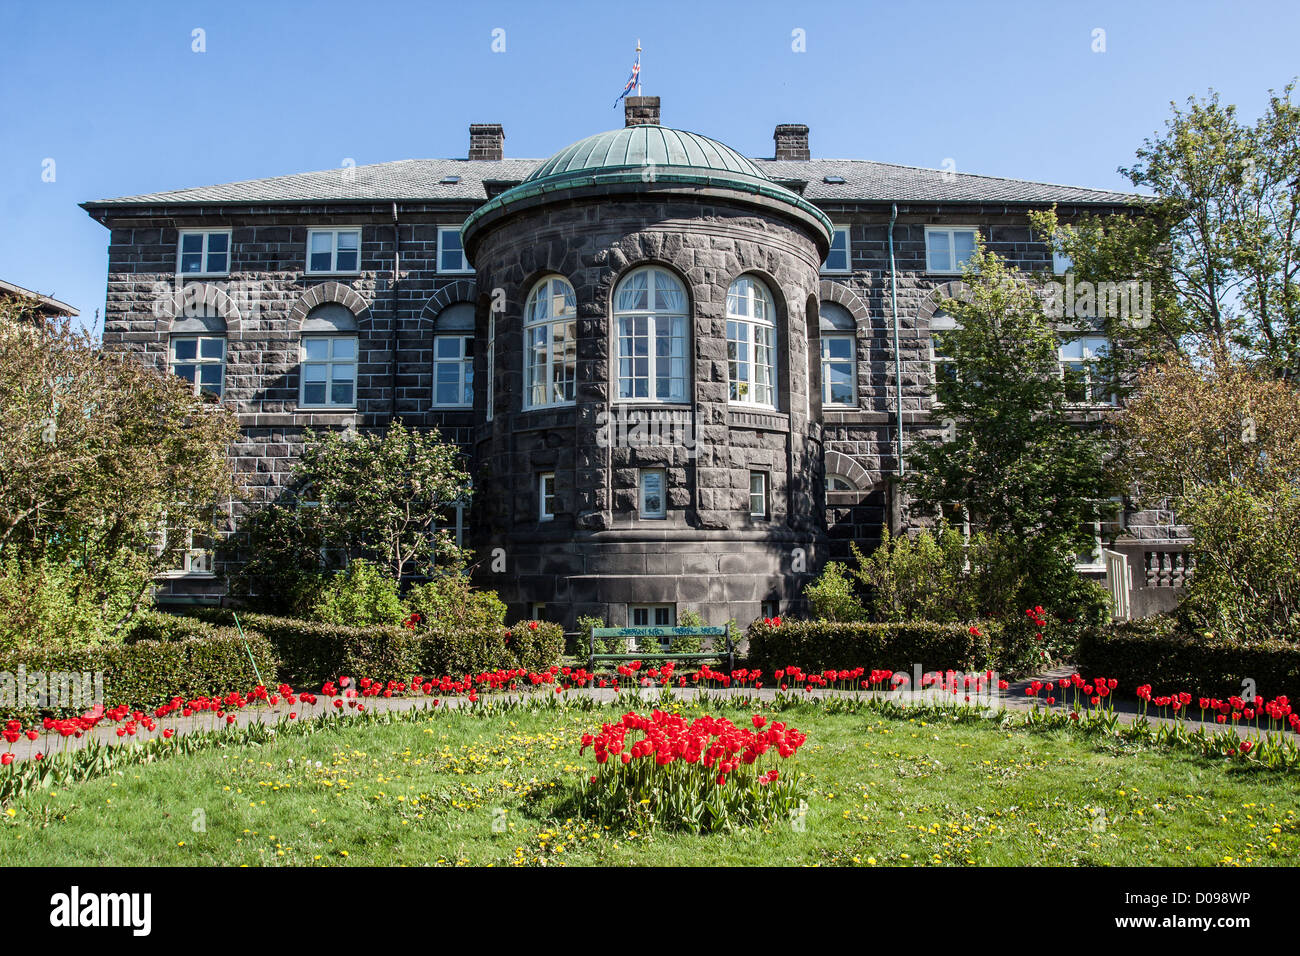 EXTERIOR VIEW OF THE ICELANDIC PARLIAMENT AND ITS GARDEN ALTHINGI BASALT EDIFICE BUILT IN 1881 REYKJAVIK ICELAND Stock Photo